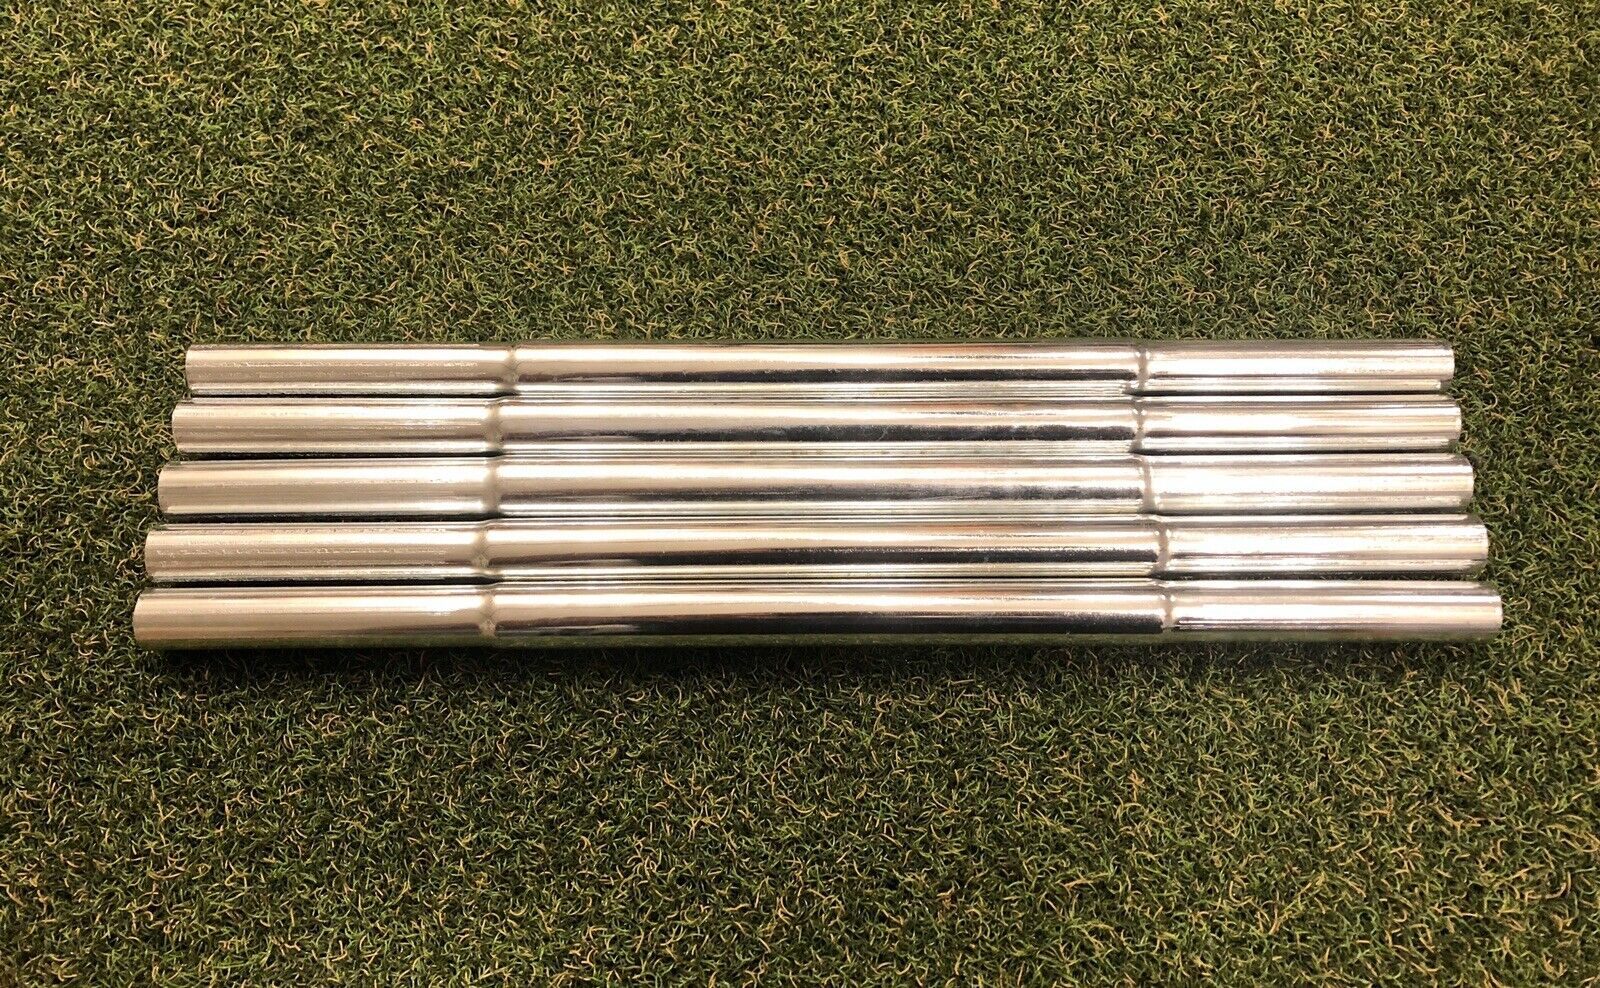 Premium Stainless Steel Golf Shaft Butt Extensions - The Golf Club Trader